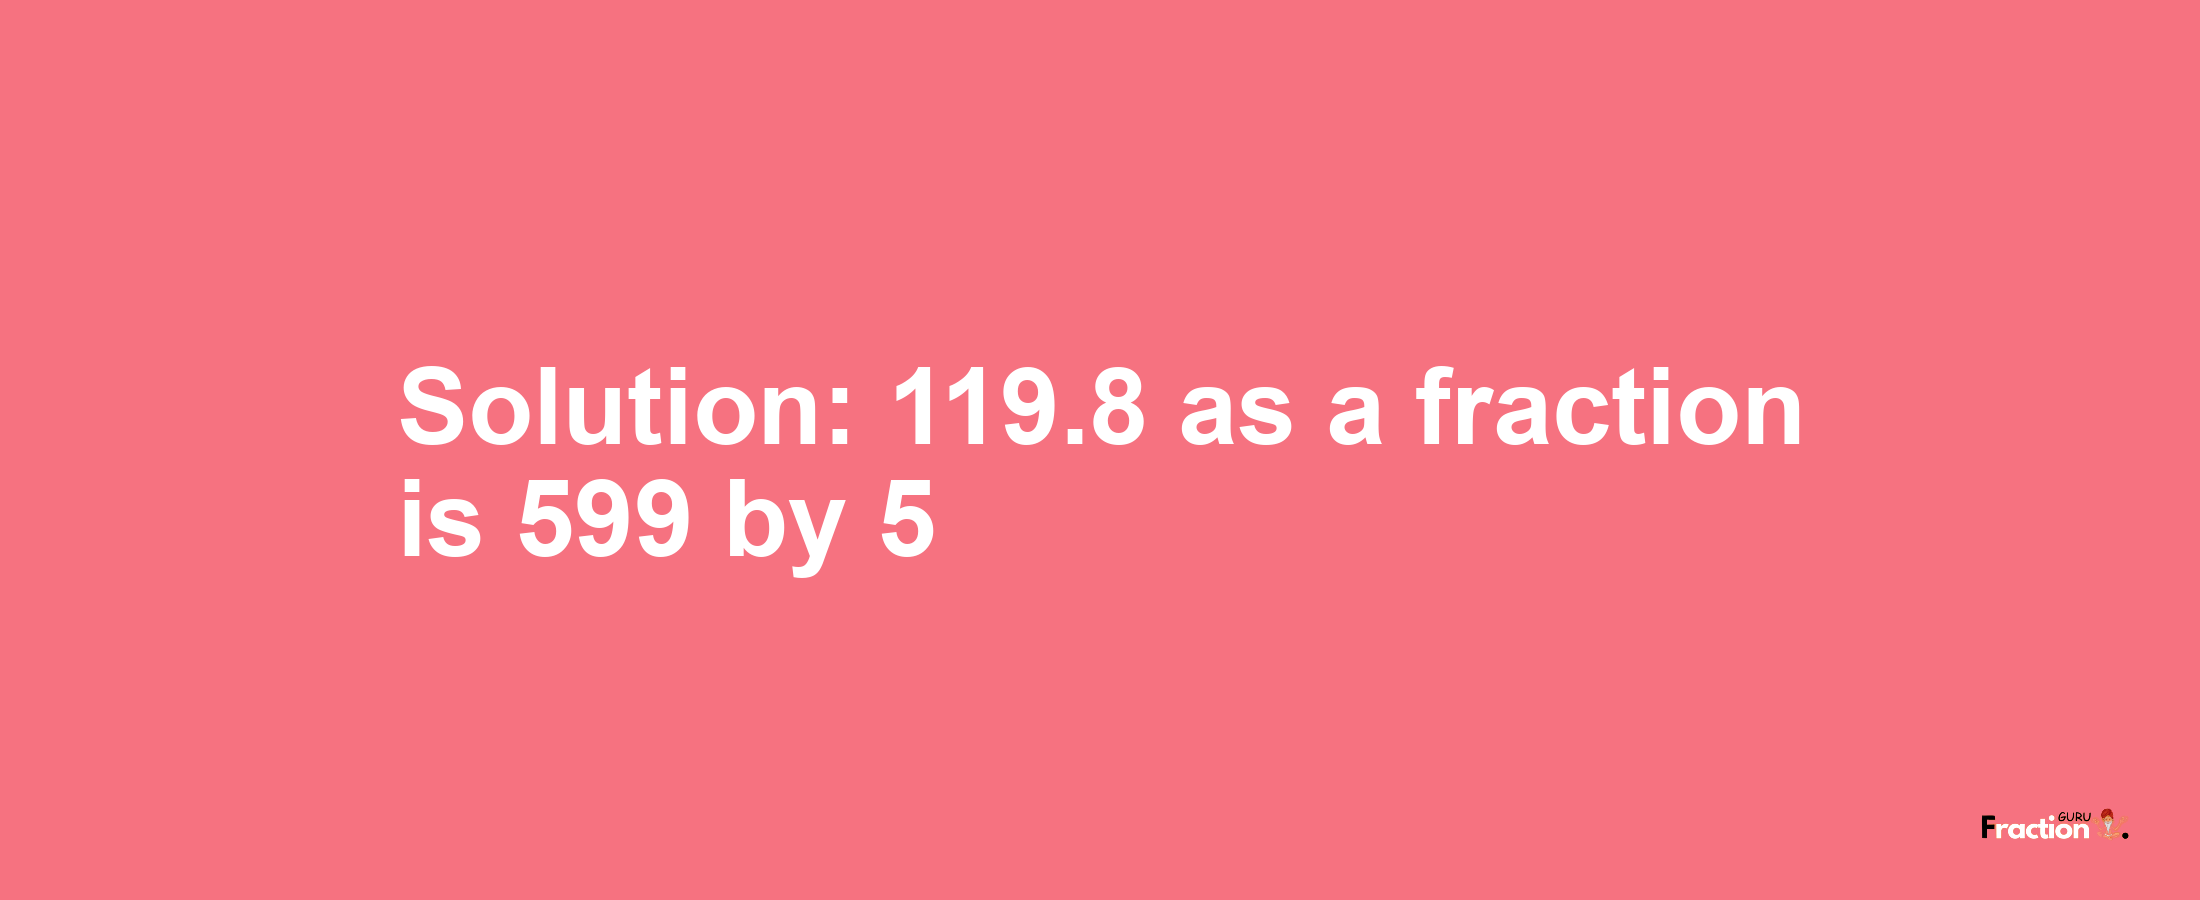 Solution:119.8 as a fraction is 599/5